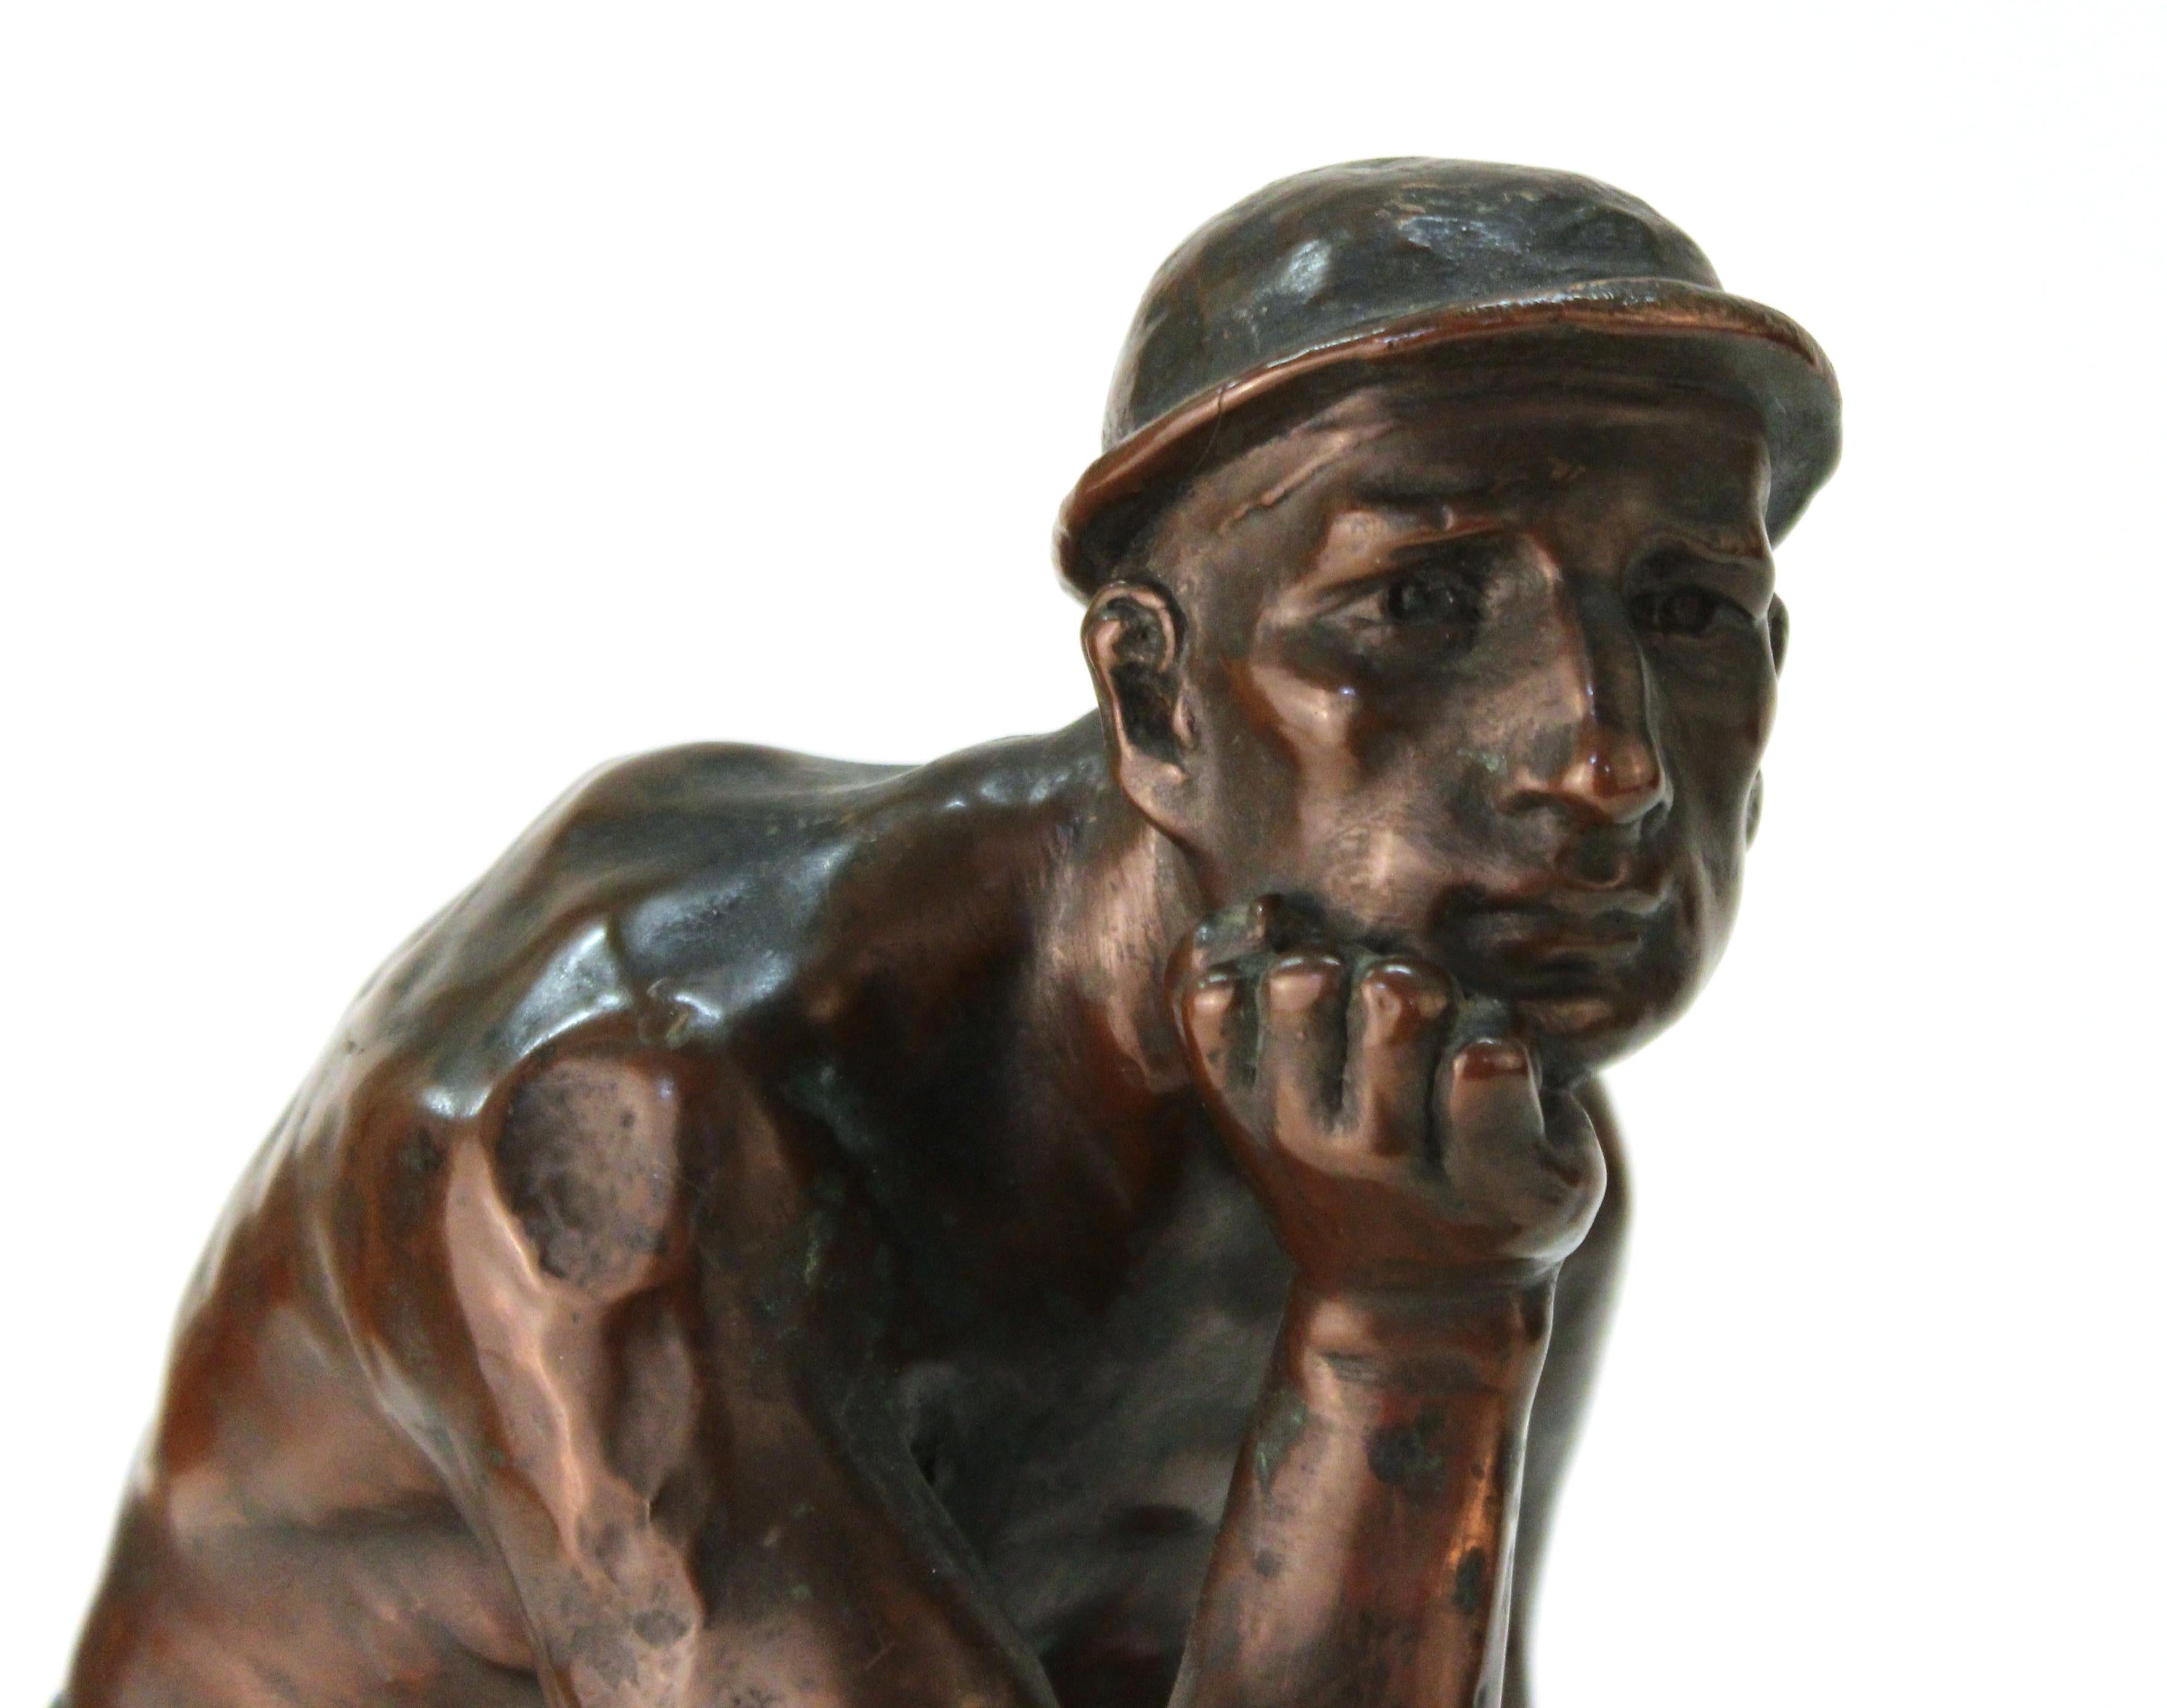 Art Deco period European sculpture of an industry worker, illegibly signed. The piece is made of copper clad metal and is in great antique condition with age-appropriate wear.